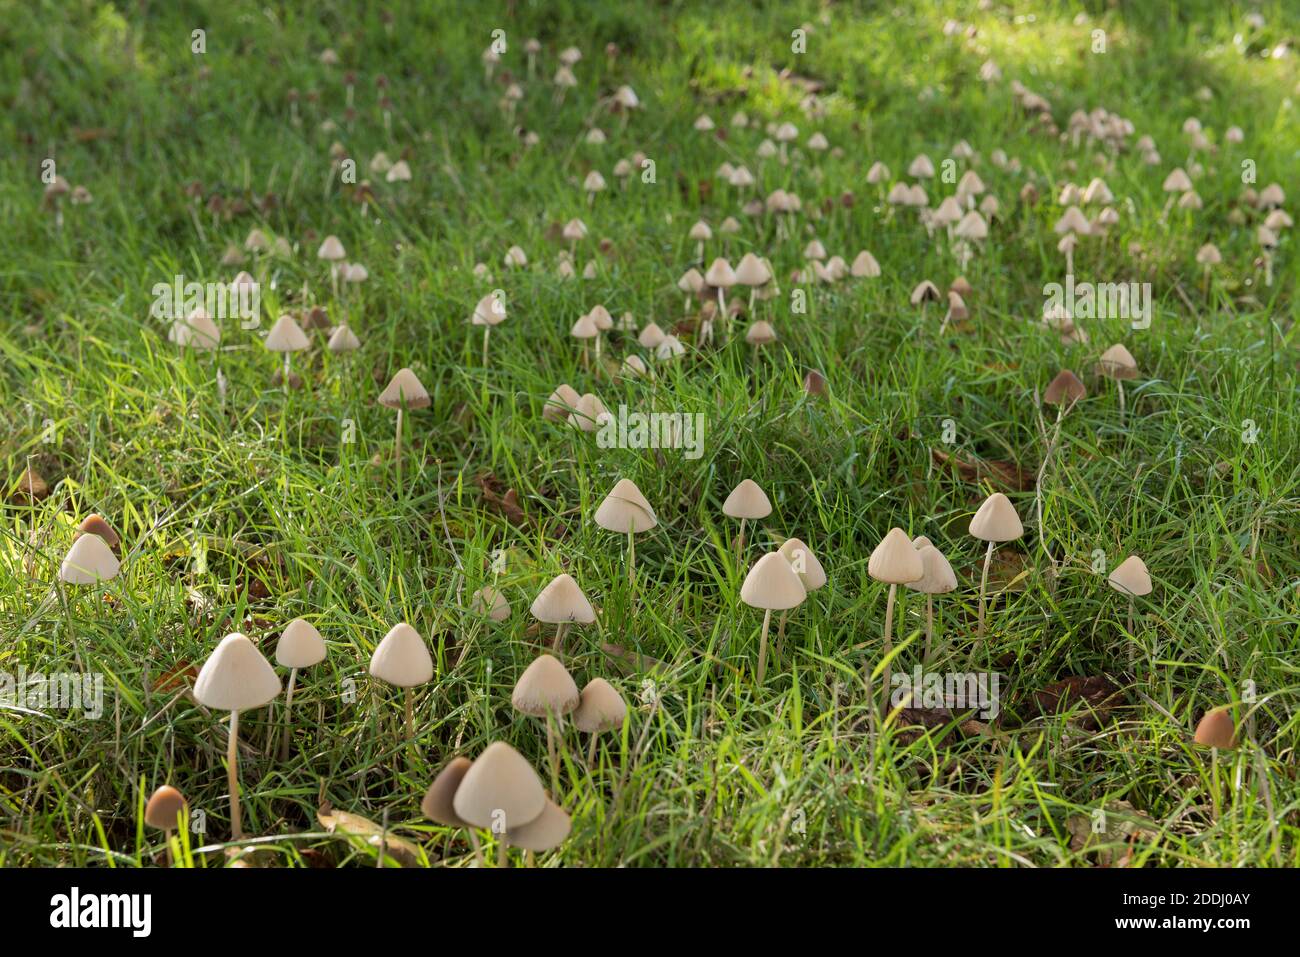 Milky white dunce cap Conocybe lactea patch of fungi mushroom in grazed meadow grass by sheep  beneath horse chestnut tree in early morning Stock Photo